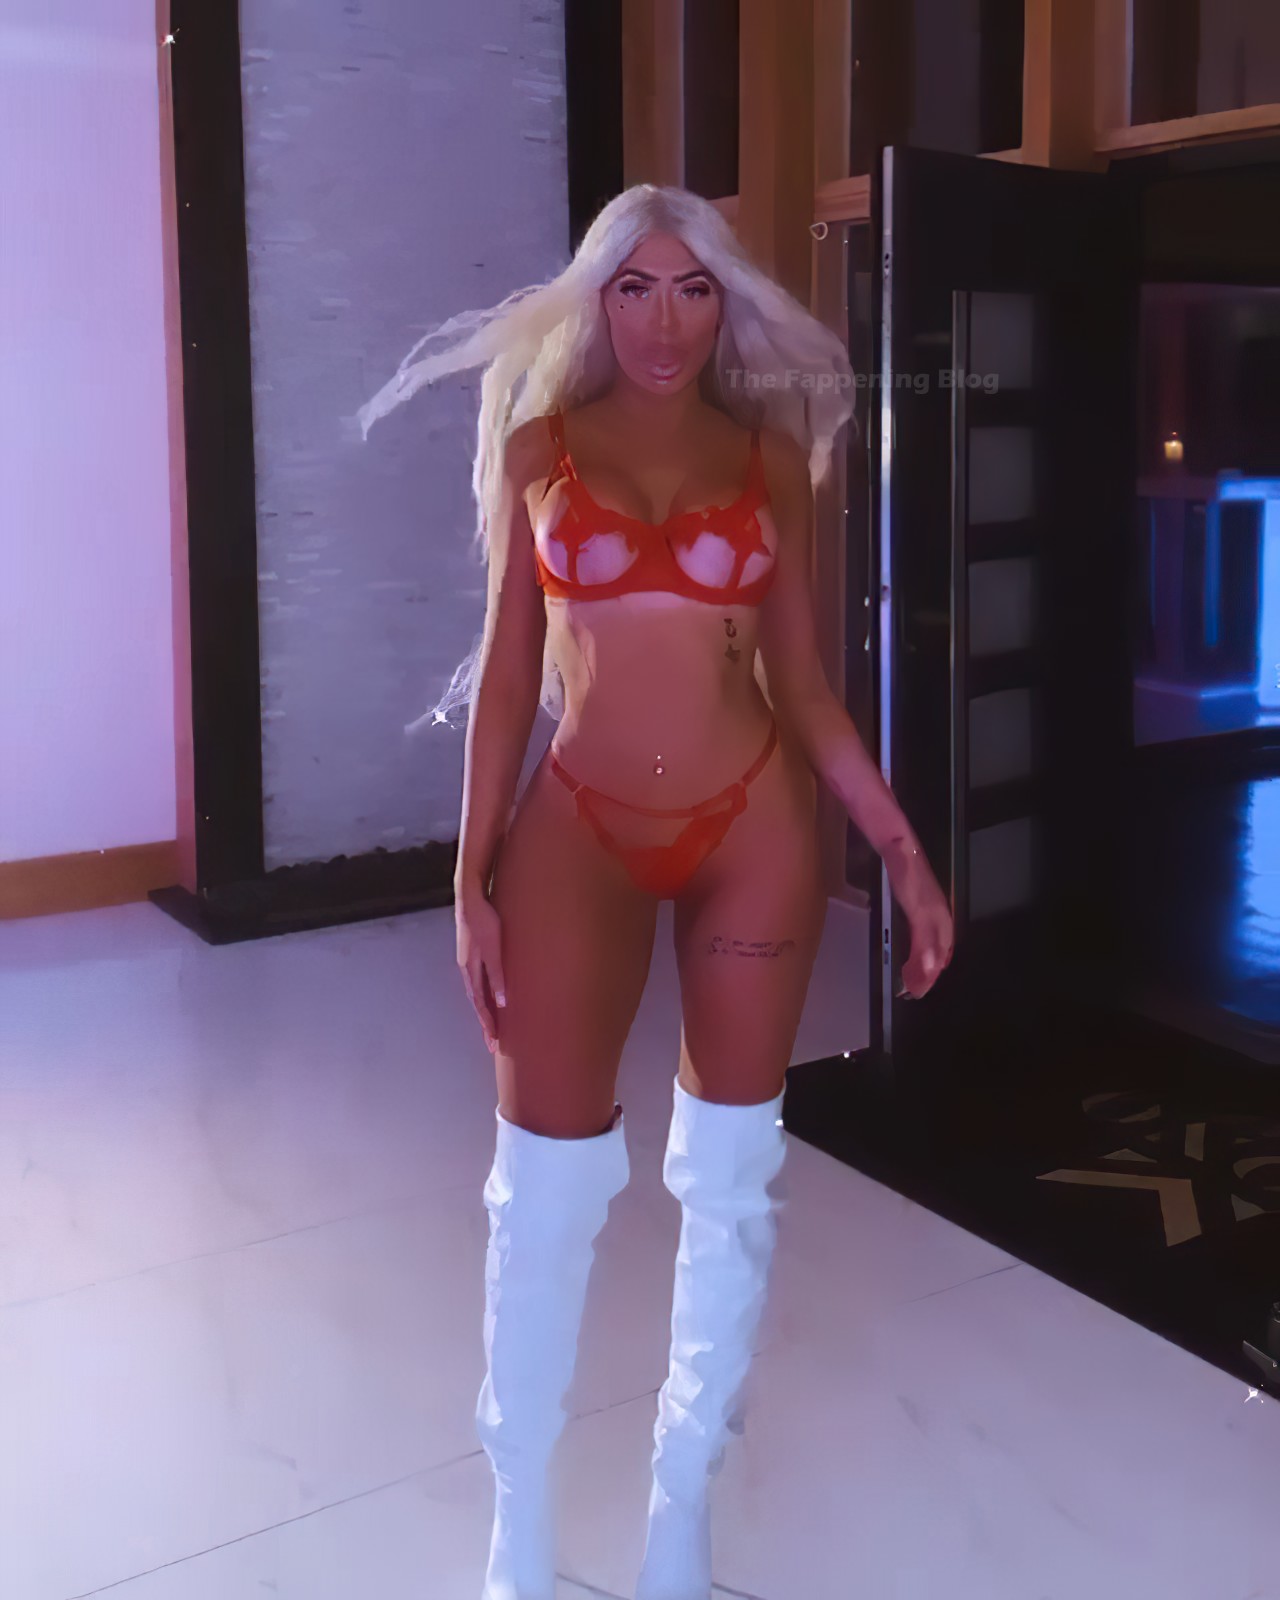 Chloe Ferry Shows Her Sexy Figure in Lingerie (3 Pics + Video)